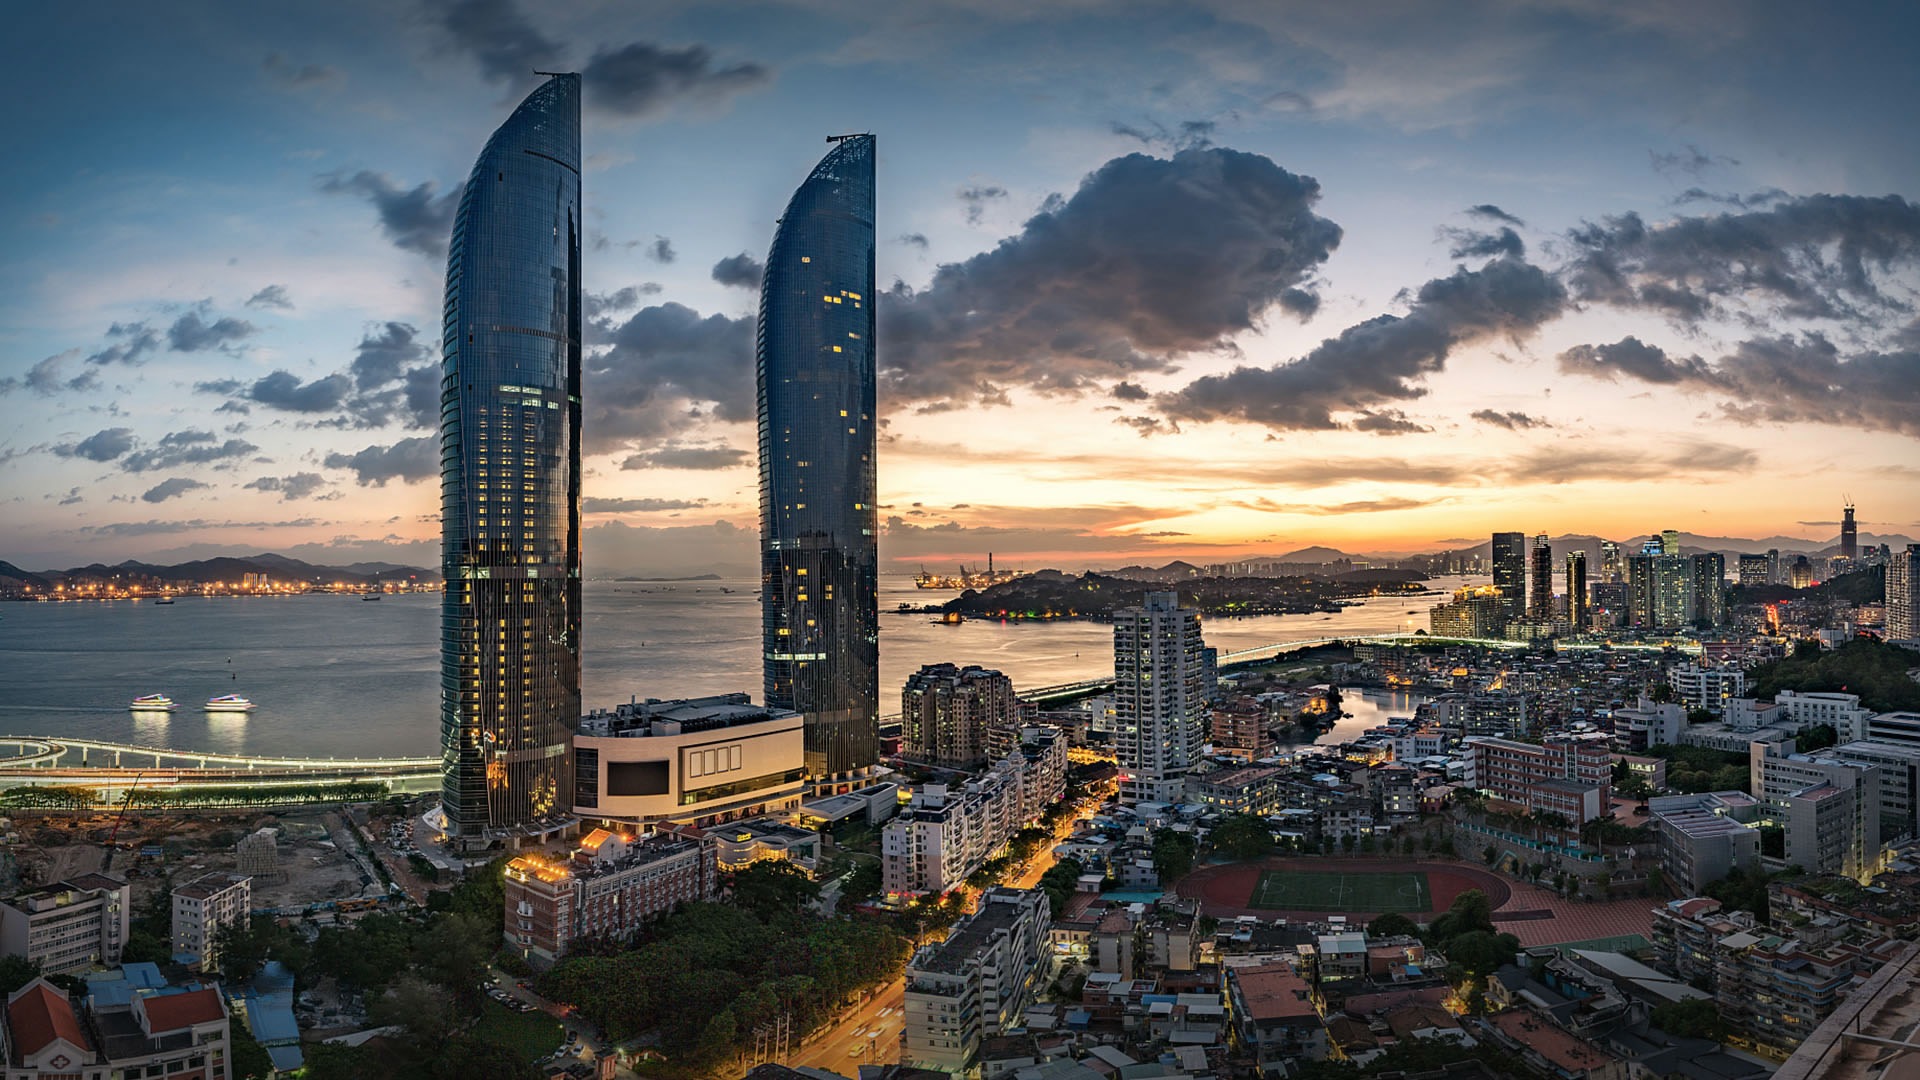 Xiamen, one of China's most livable cities